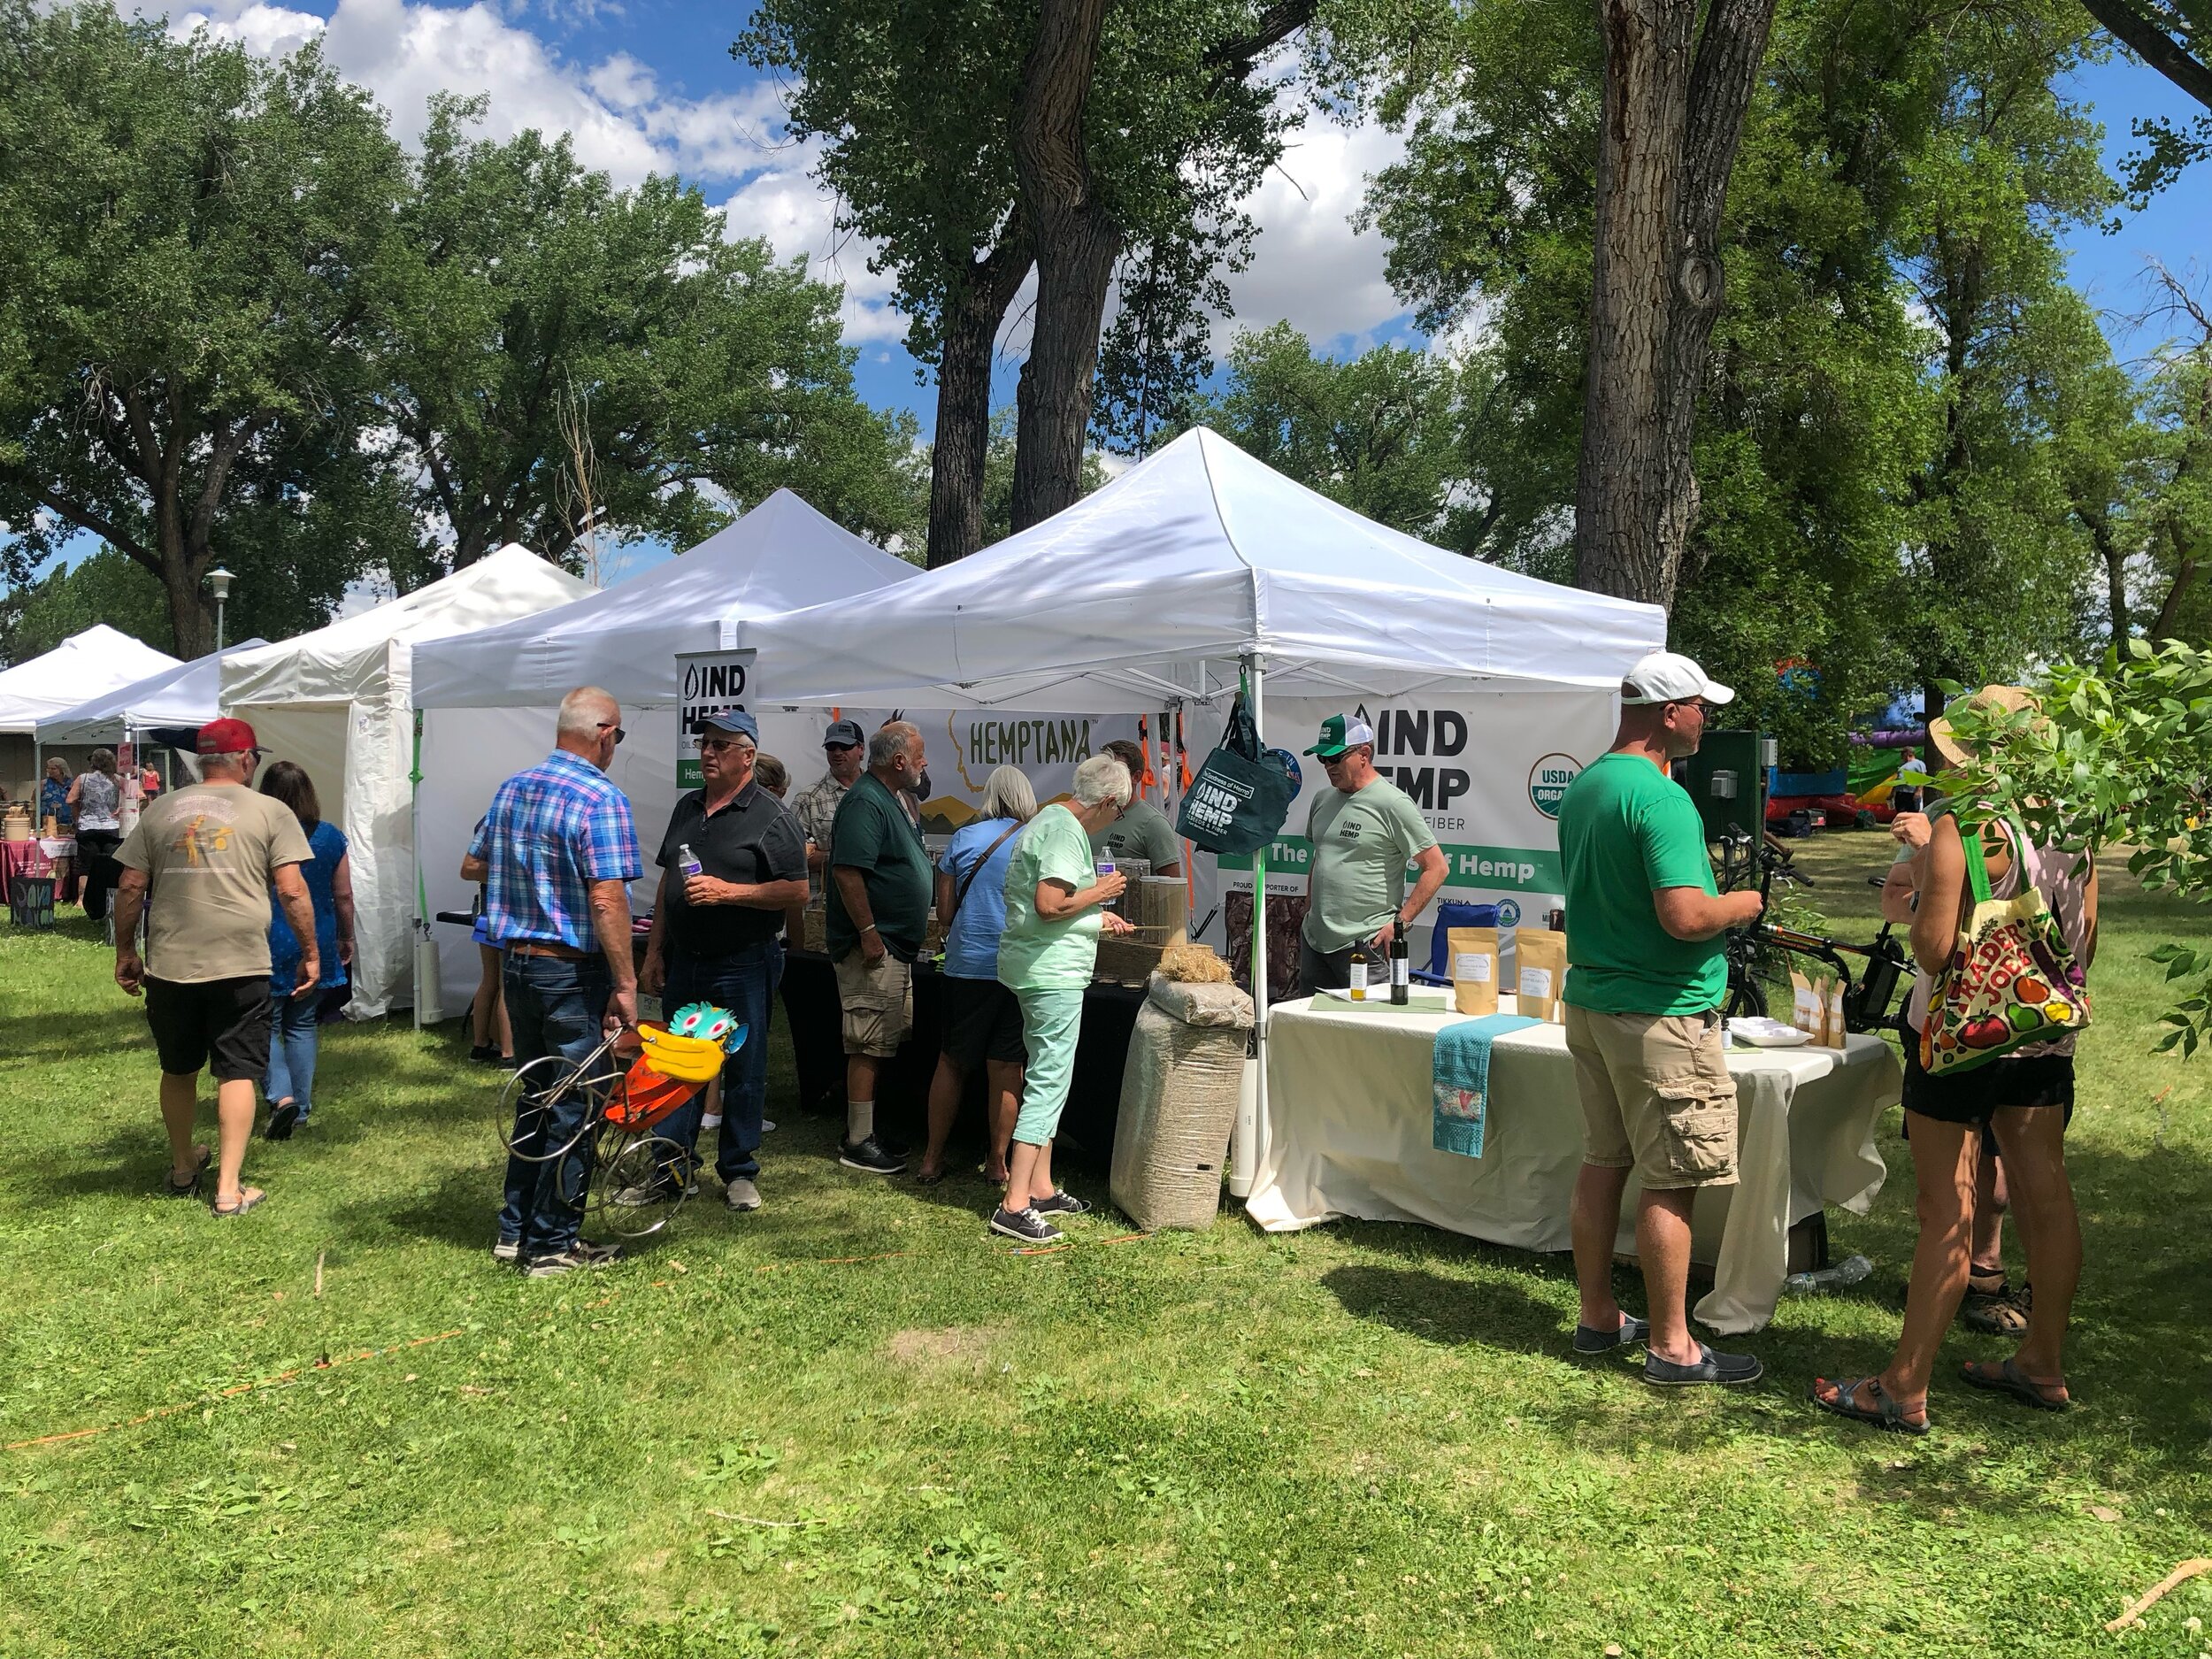 IND HEMP educating the Fort Benton community about hemp products at the Summer Celebration. Photo by Jordee Bomgardner.